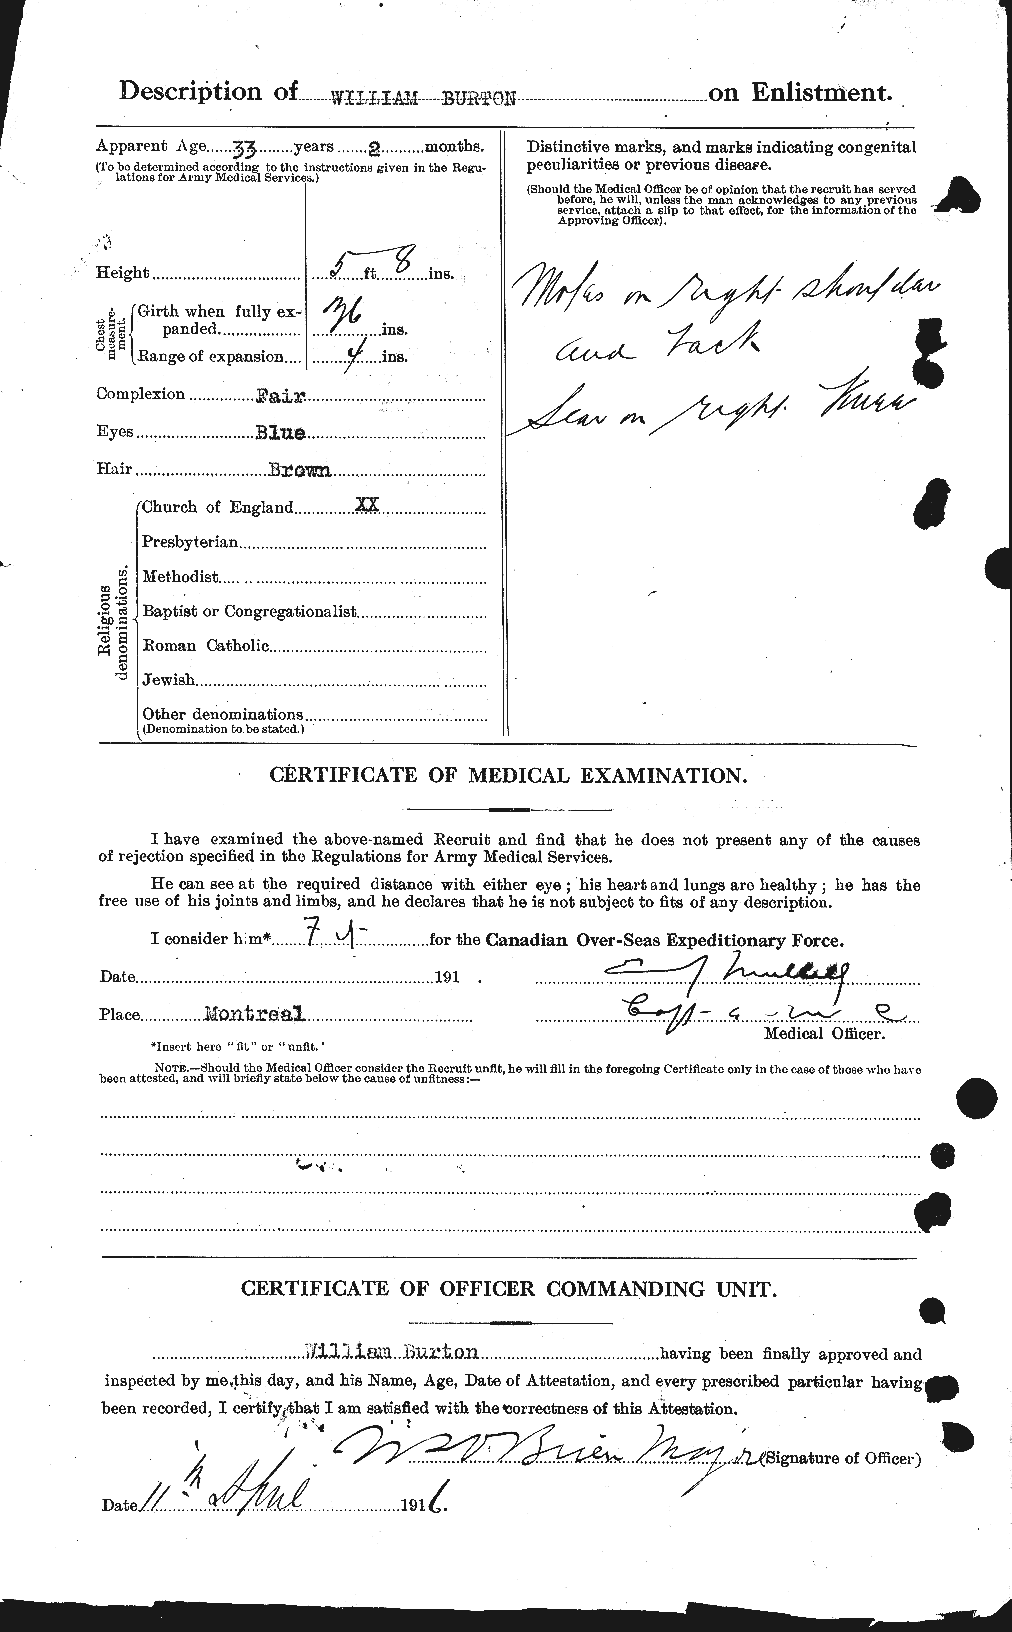 Personnel Records of the First World War - CEF 272755b